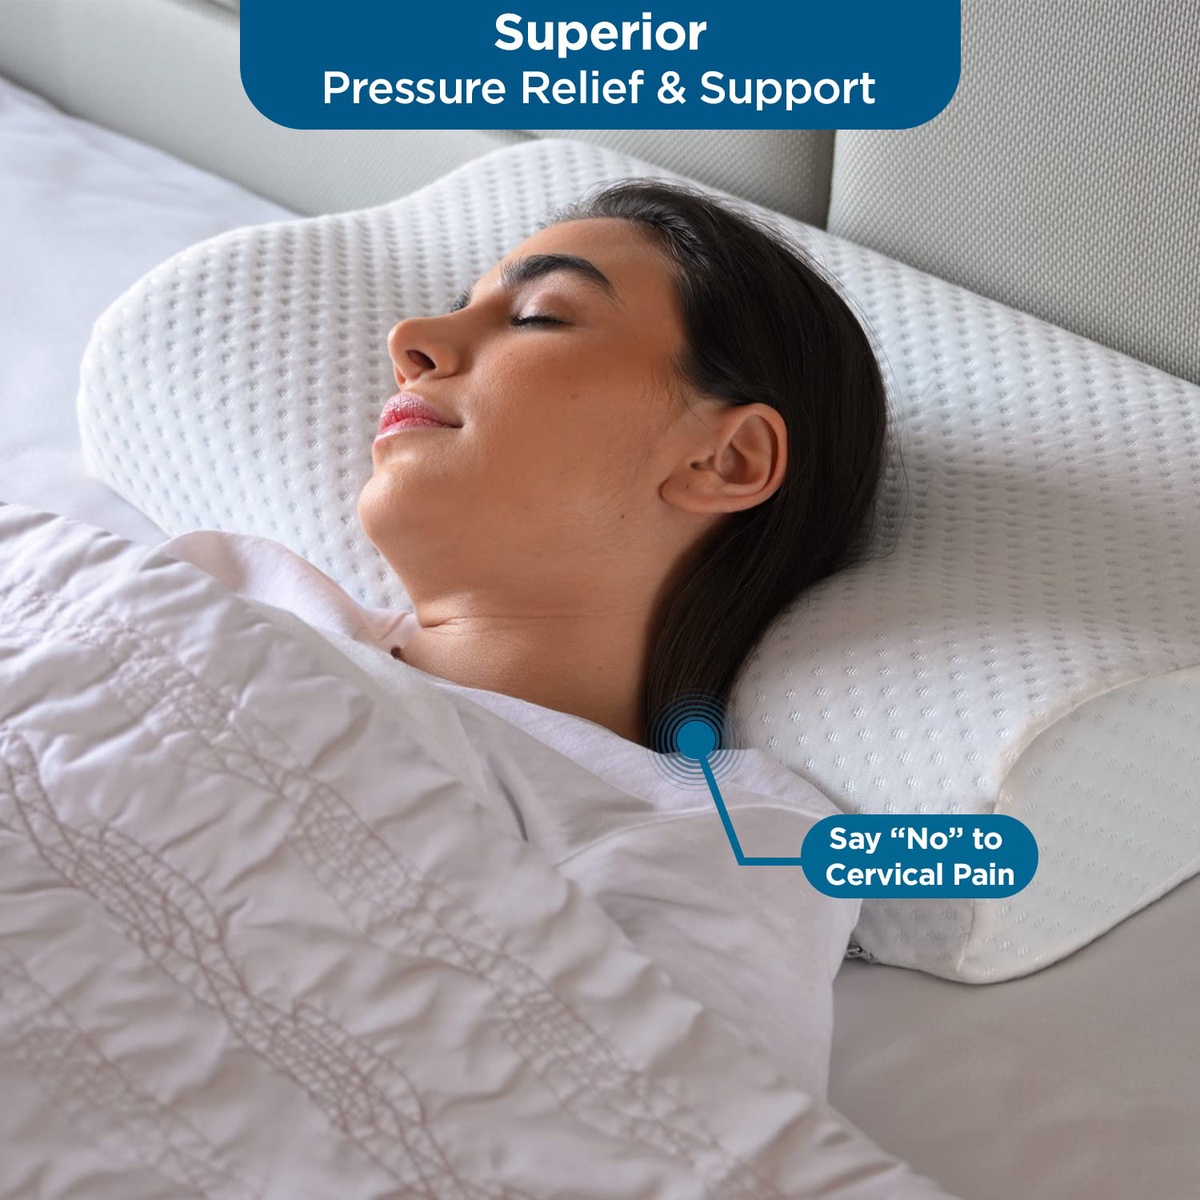 Which Best Memory Foam Pillow Is Good In India?